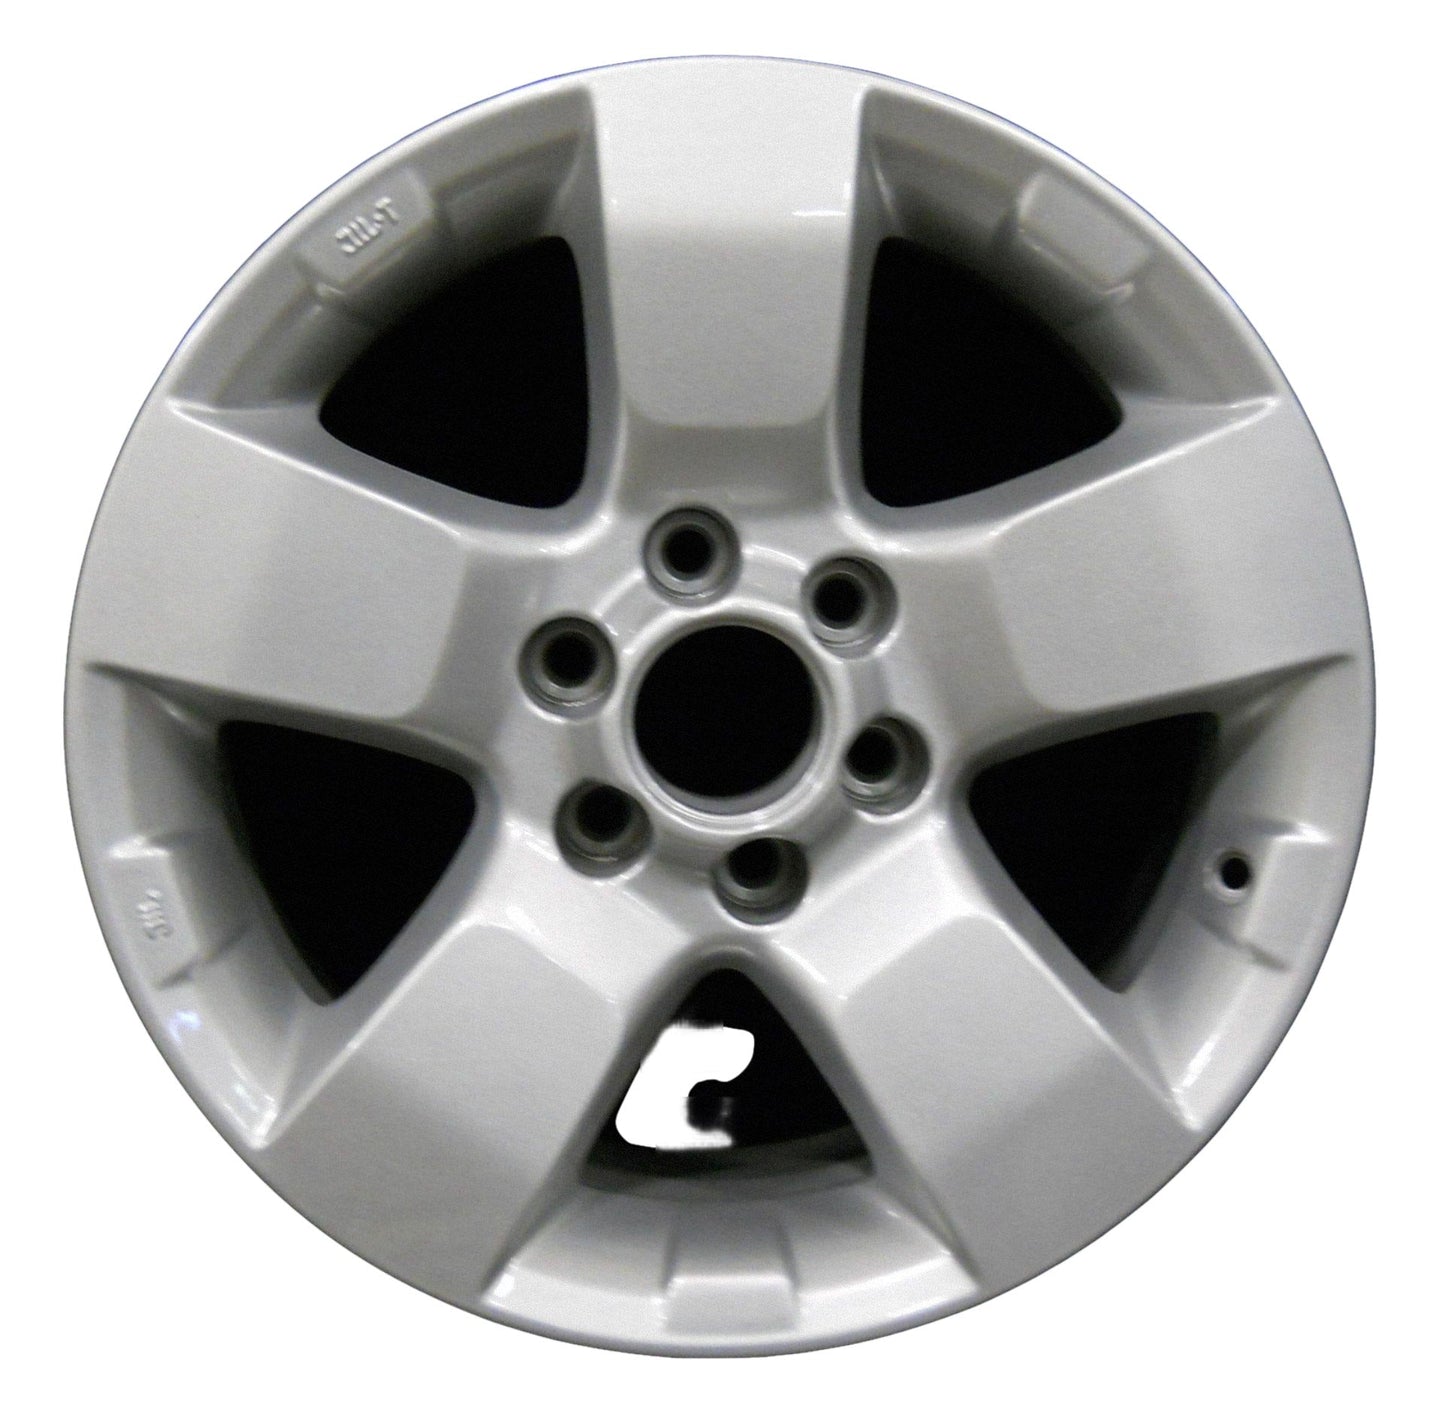 Nissan Frontier  2009, 2010, 2011, 2012, 2013 Factory OEM Car Wheel Size 16x7 Alloy WAO.62510.PS14.FF